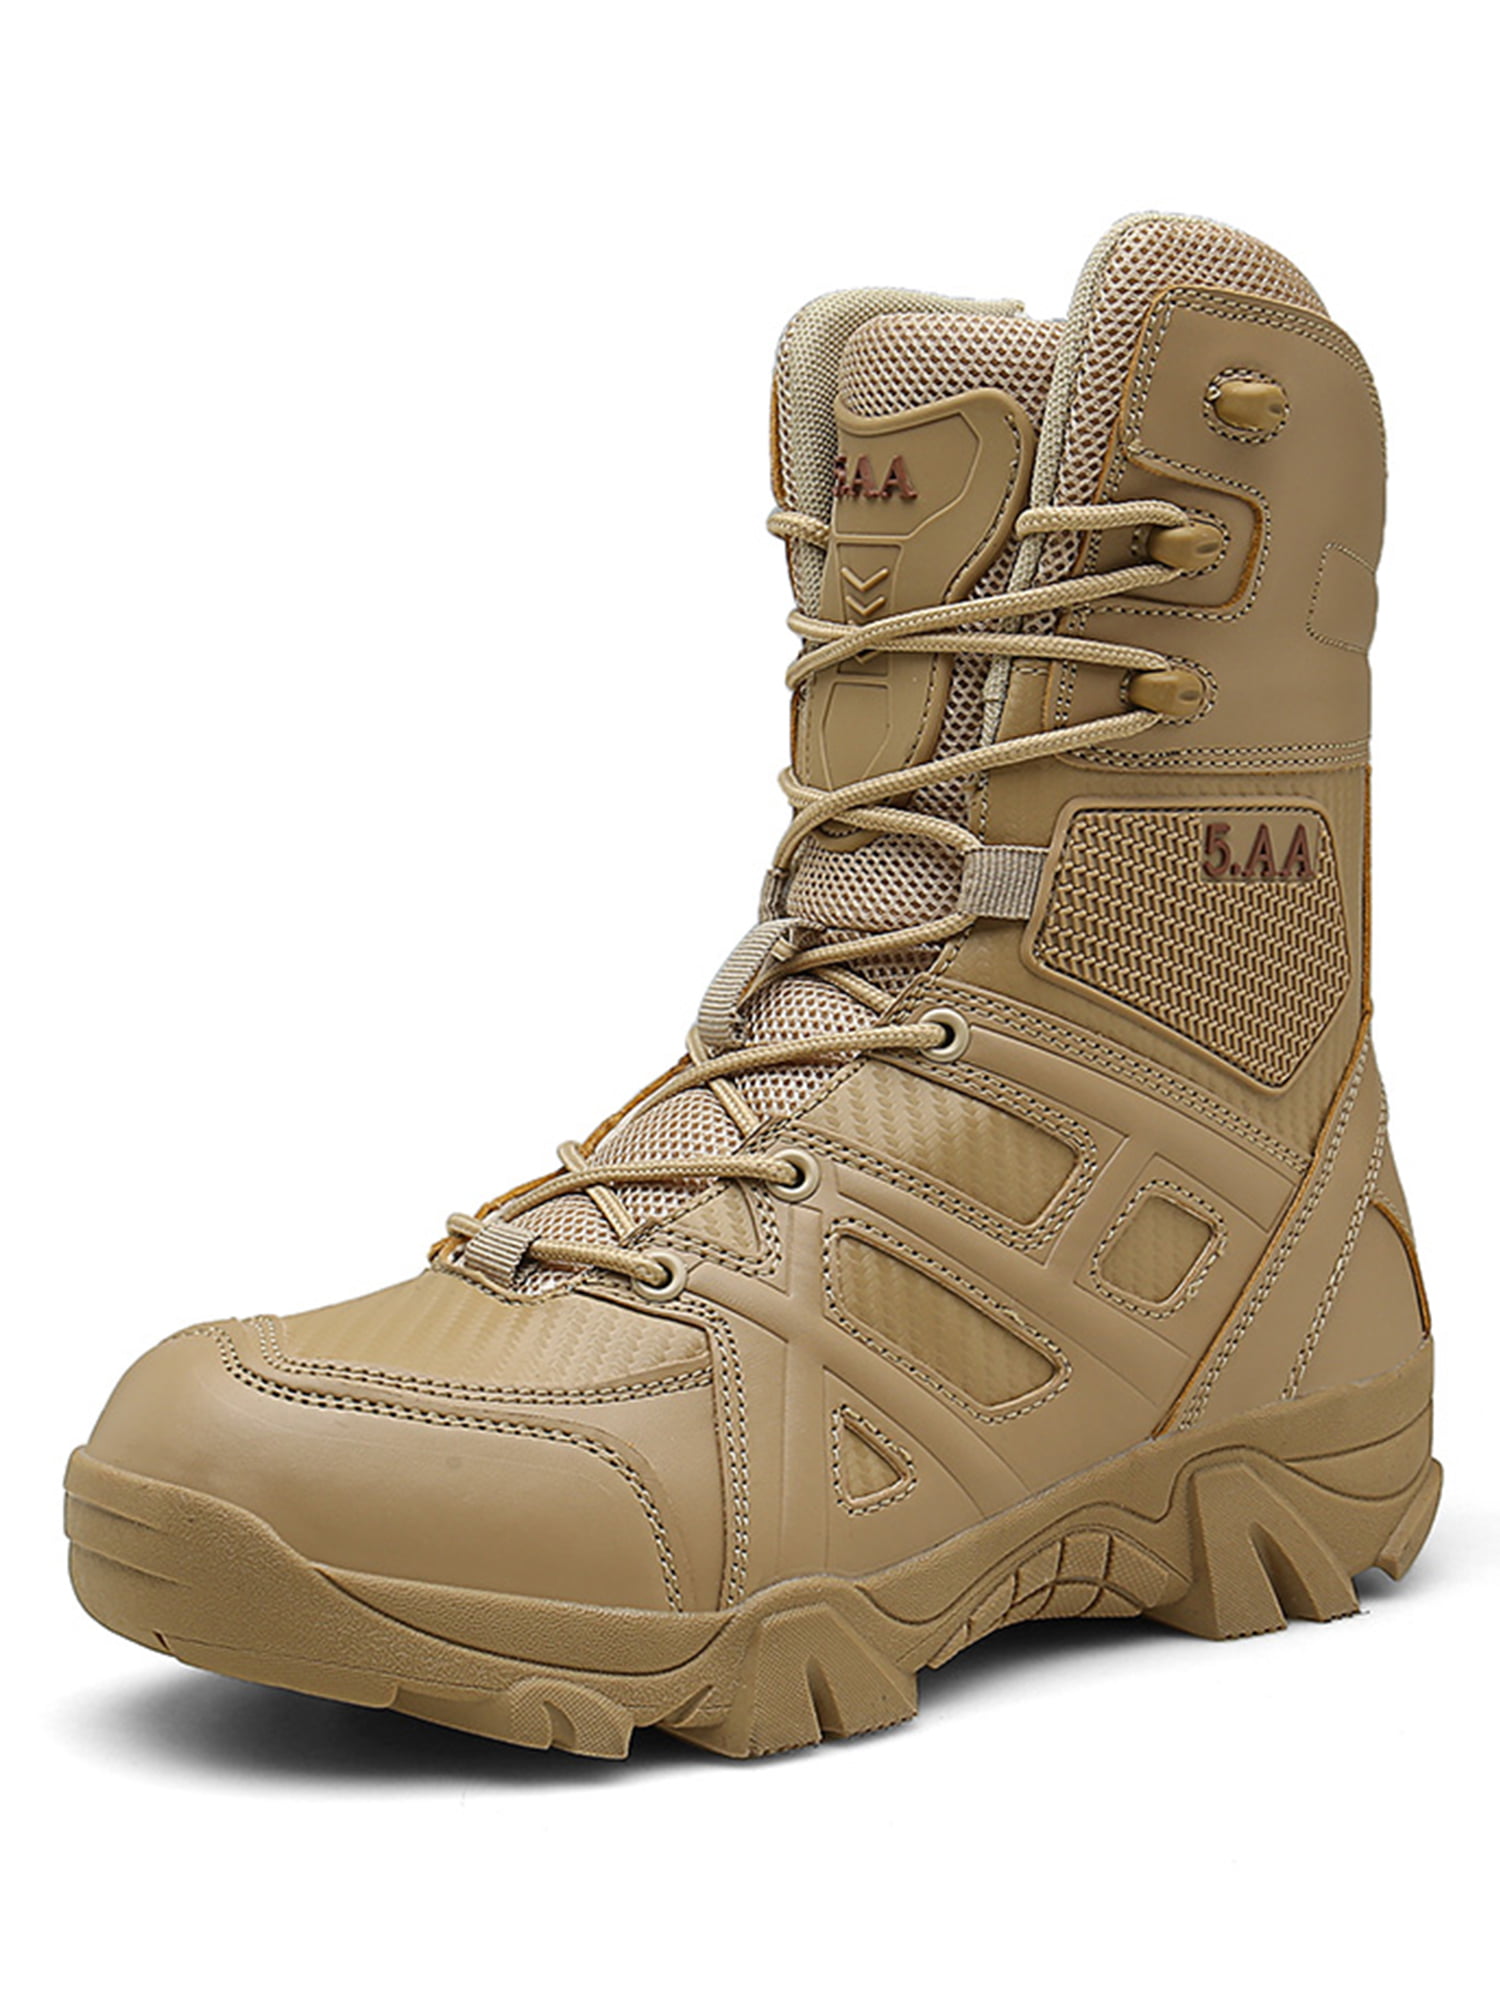 Men Camo Outdoor Military Tactical Boots Desert Shoes Hiking Travel Camping Boot